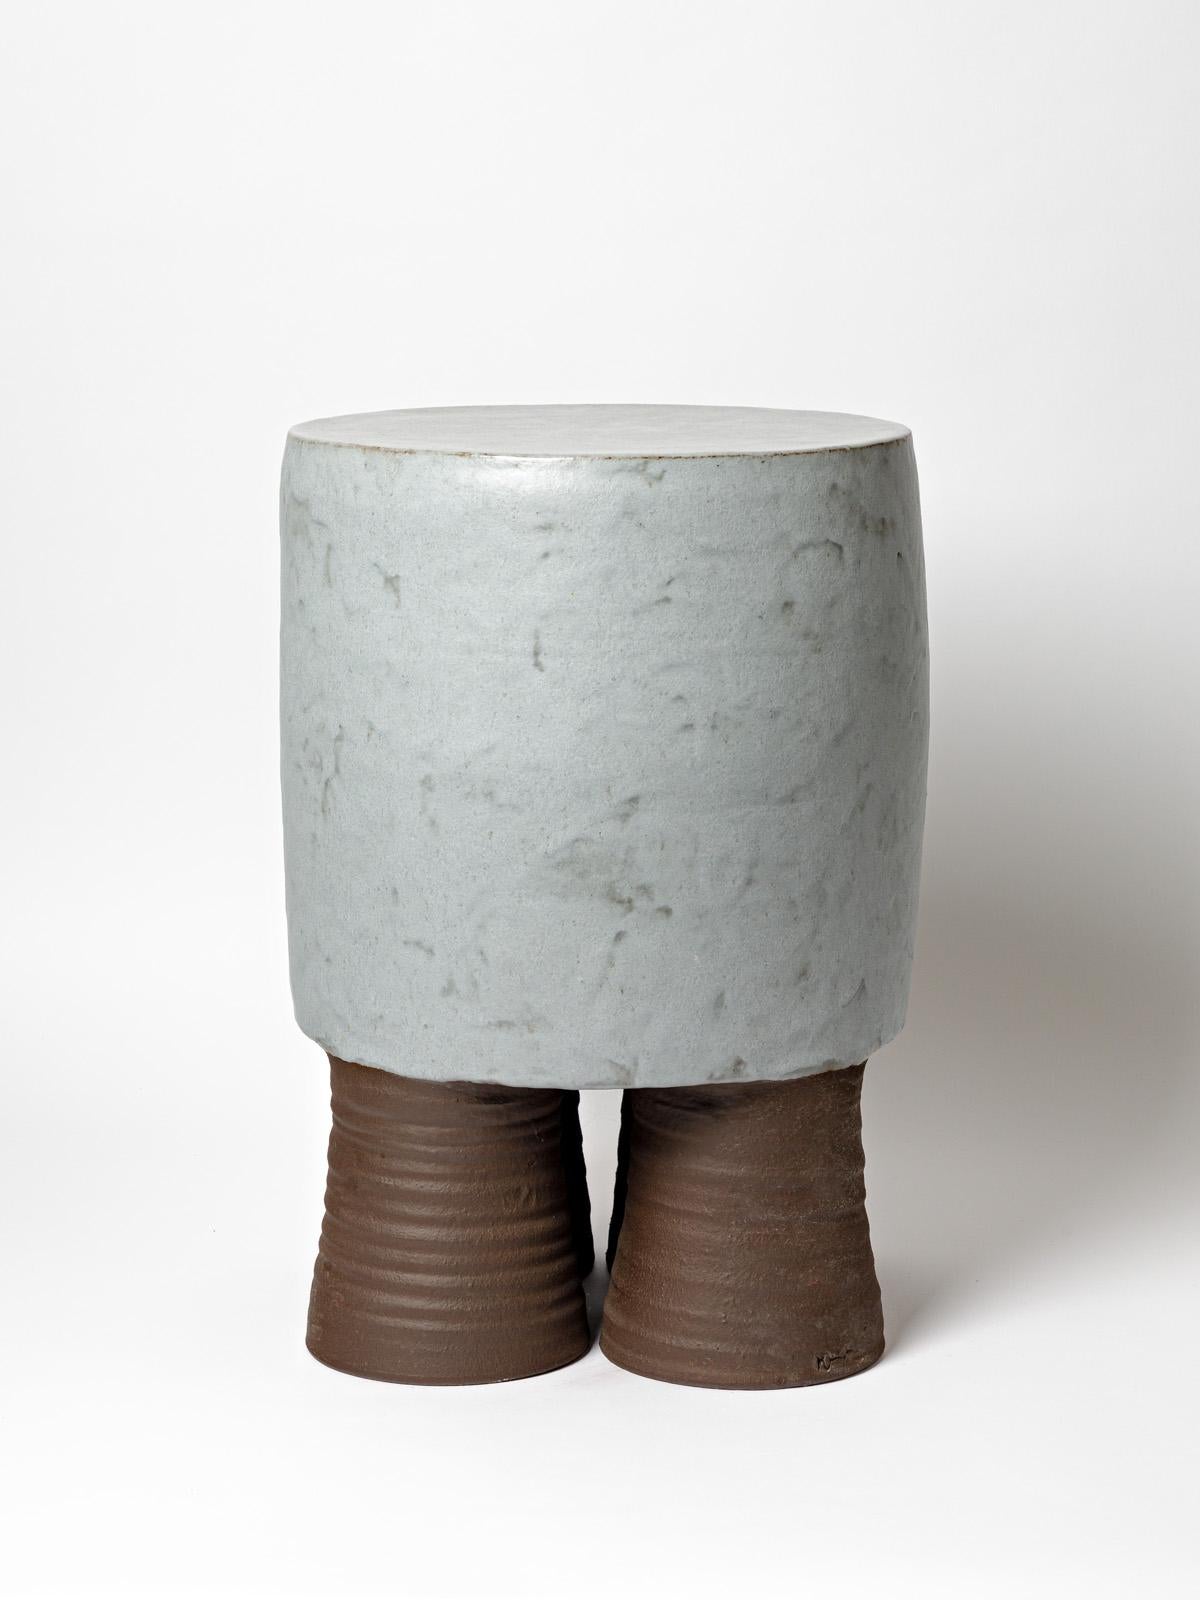 Beaux Arts Ceramic Stool or Table with Glazes Decoration by Mia Jensen, circa 2022 For Sale